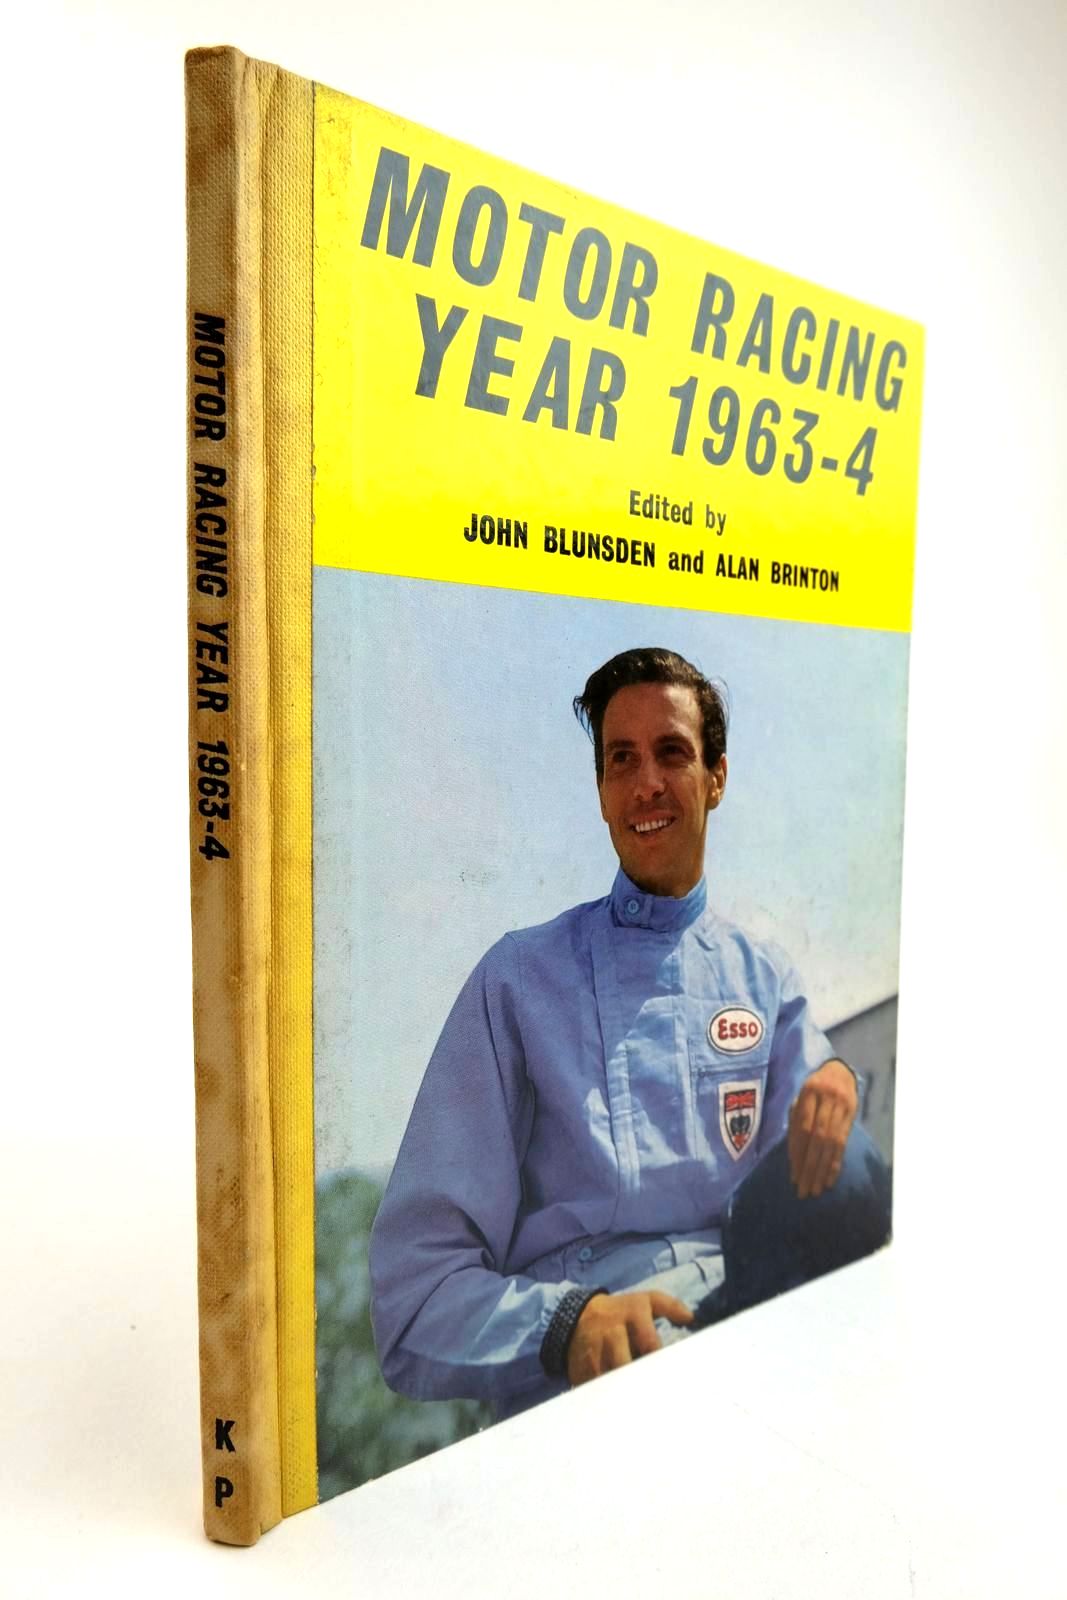 Photo of MOTOR RACING YEAR 1963-4 written by Brinton, Alan
Blunsden, John published by Knightsbridge Publications (STOCK CODE: 2134306)  for sale by Stella & Rose's Books